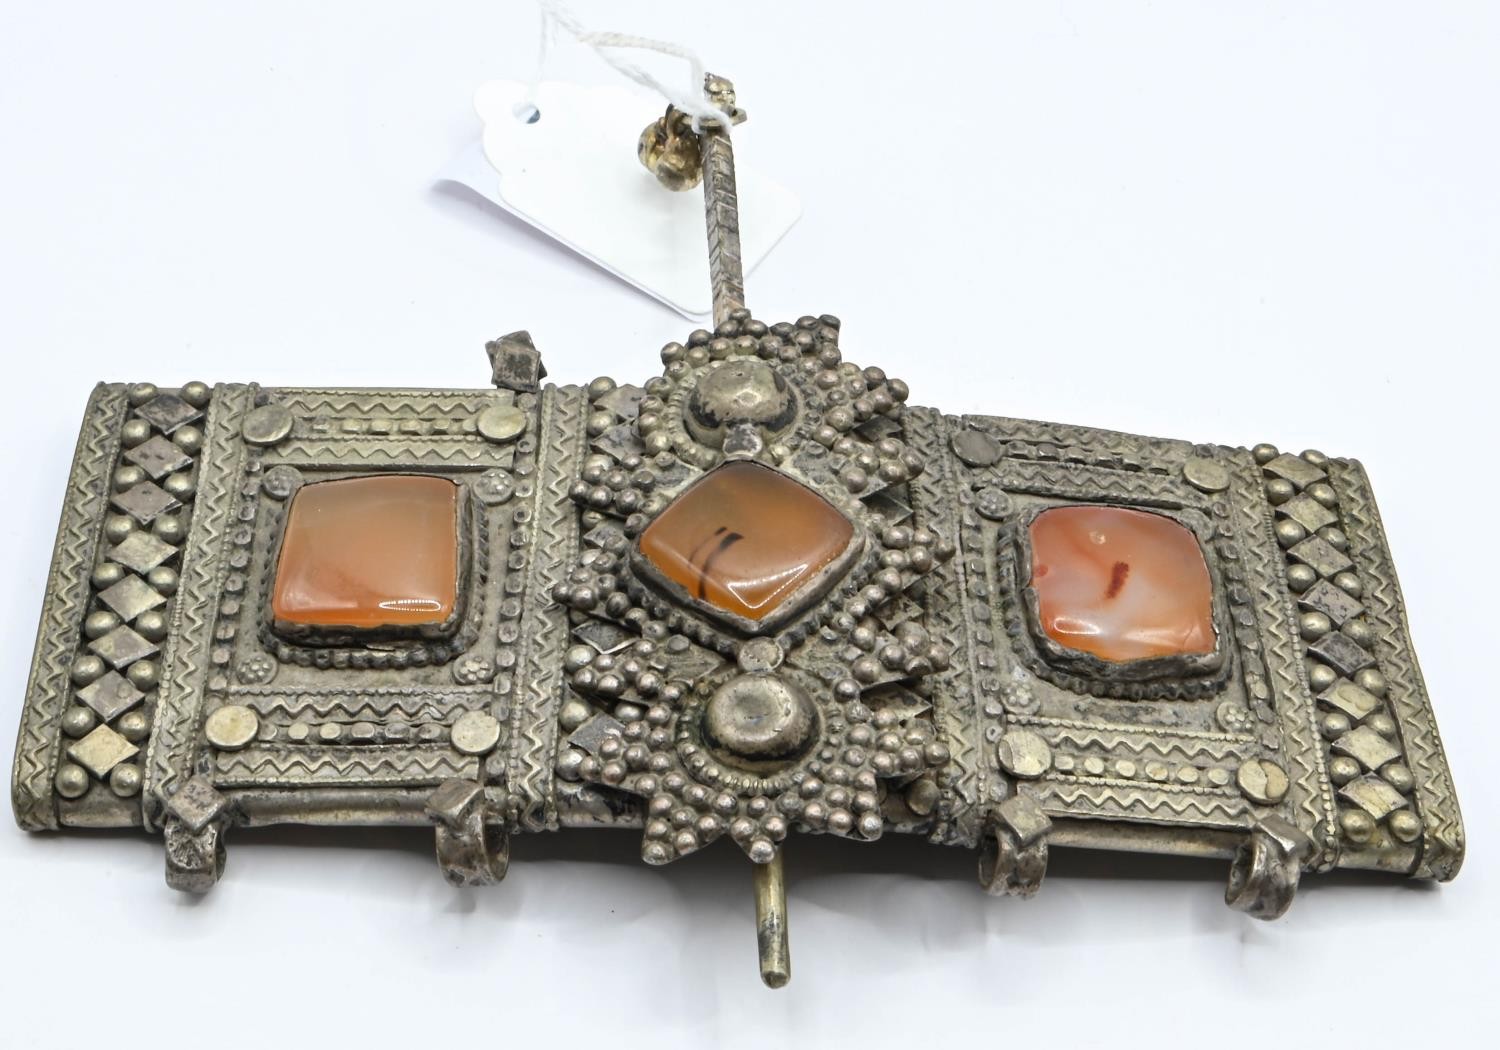 White metal Yemeni or Bedouin decorative buckle set with agate.